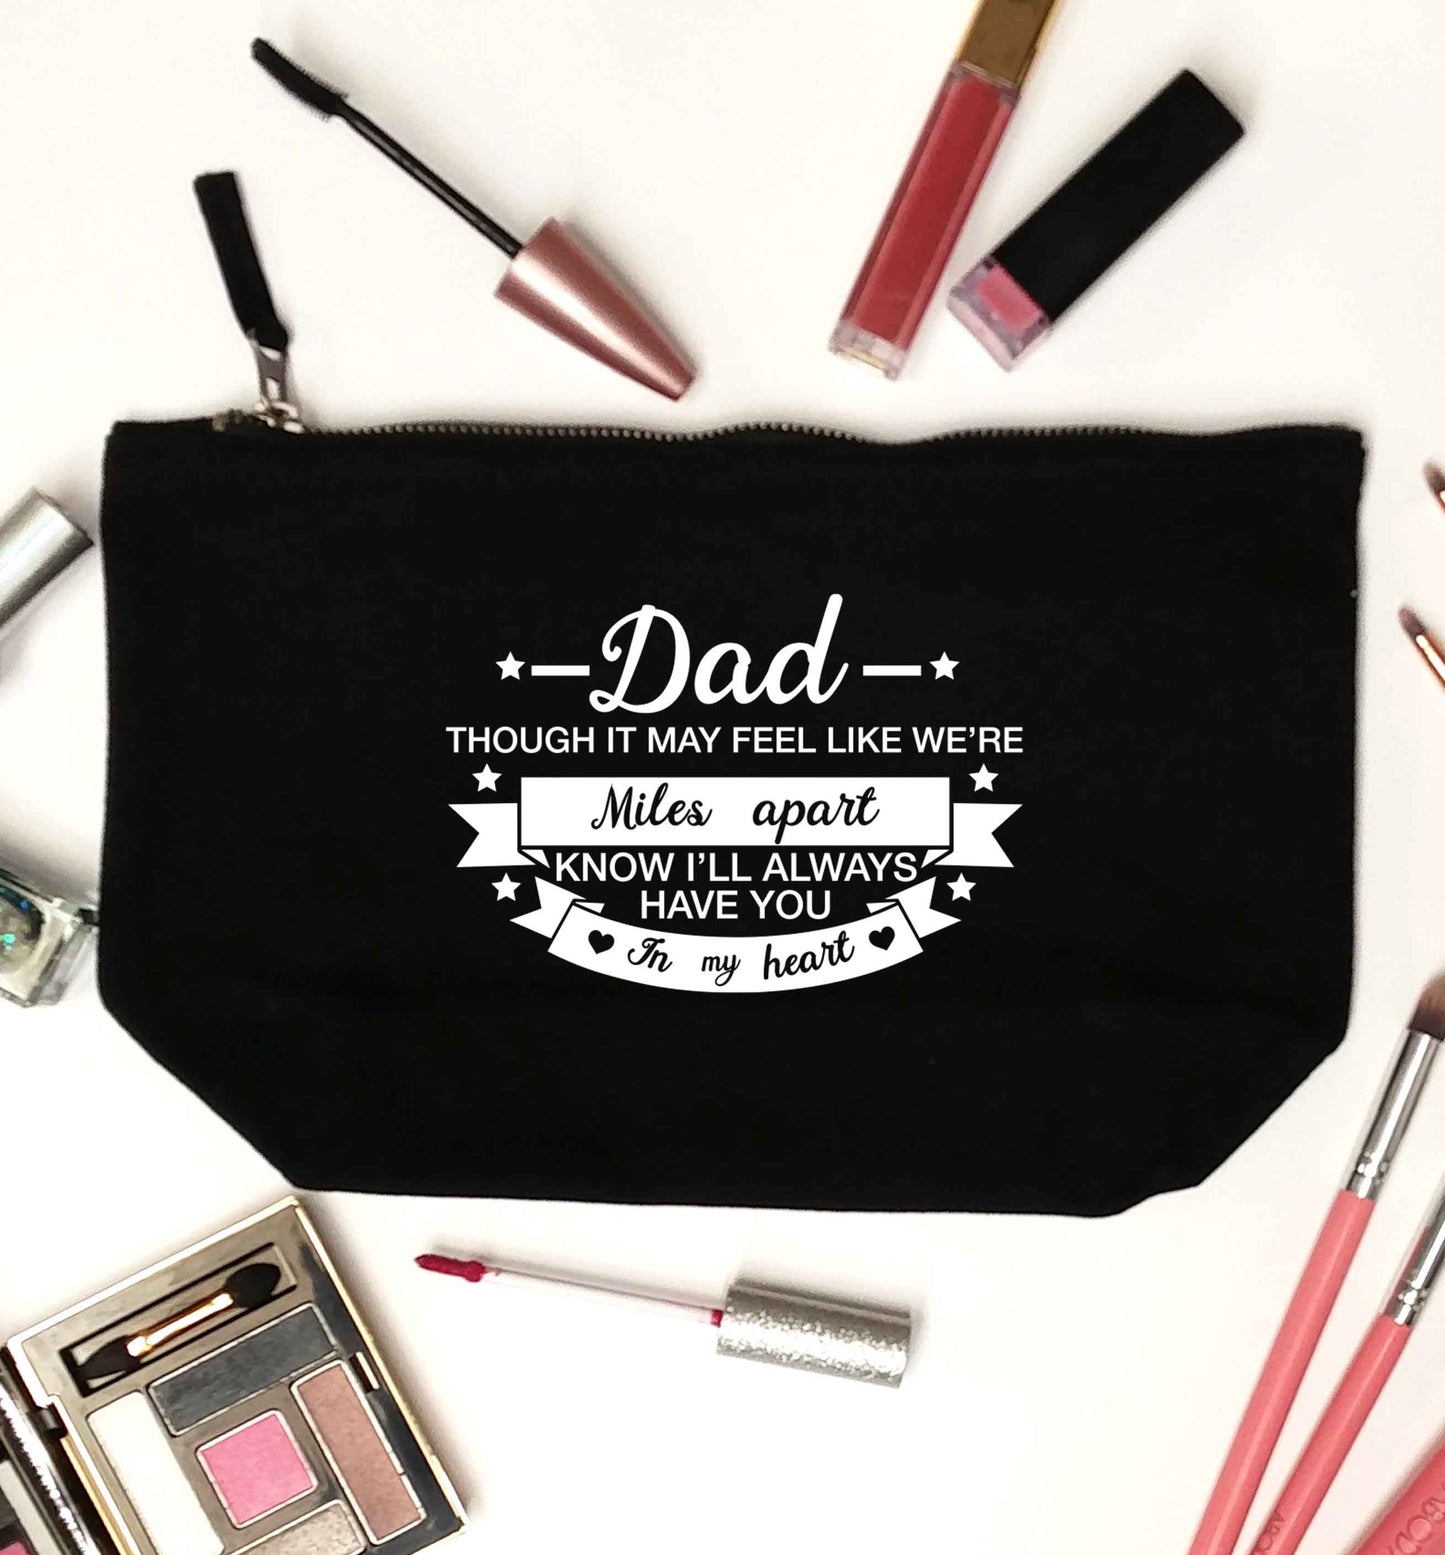 Dad though it may feel like we're miles apart know I'll always have you in my heart black makeup bag